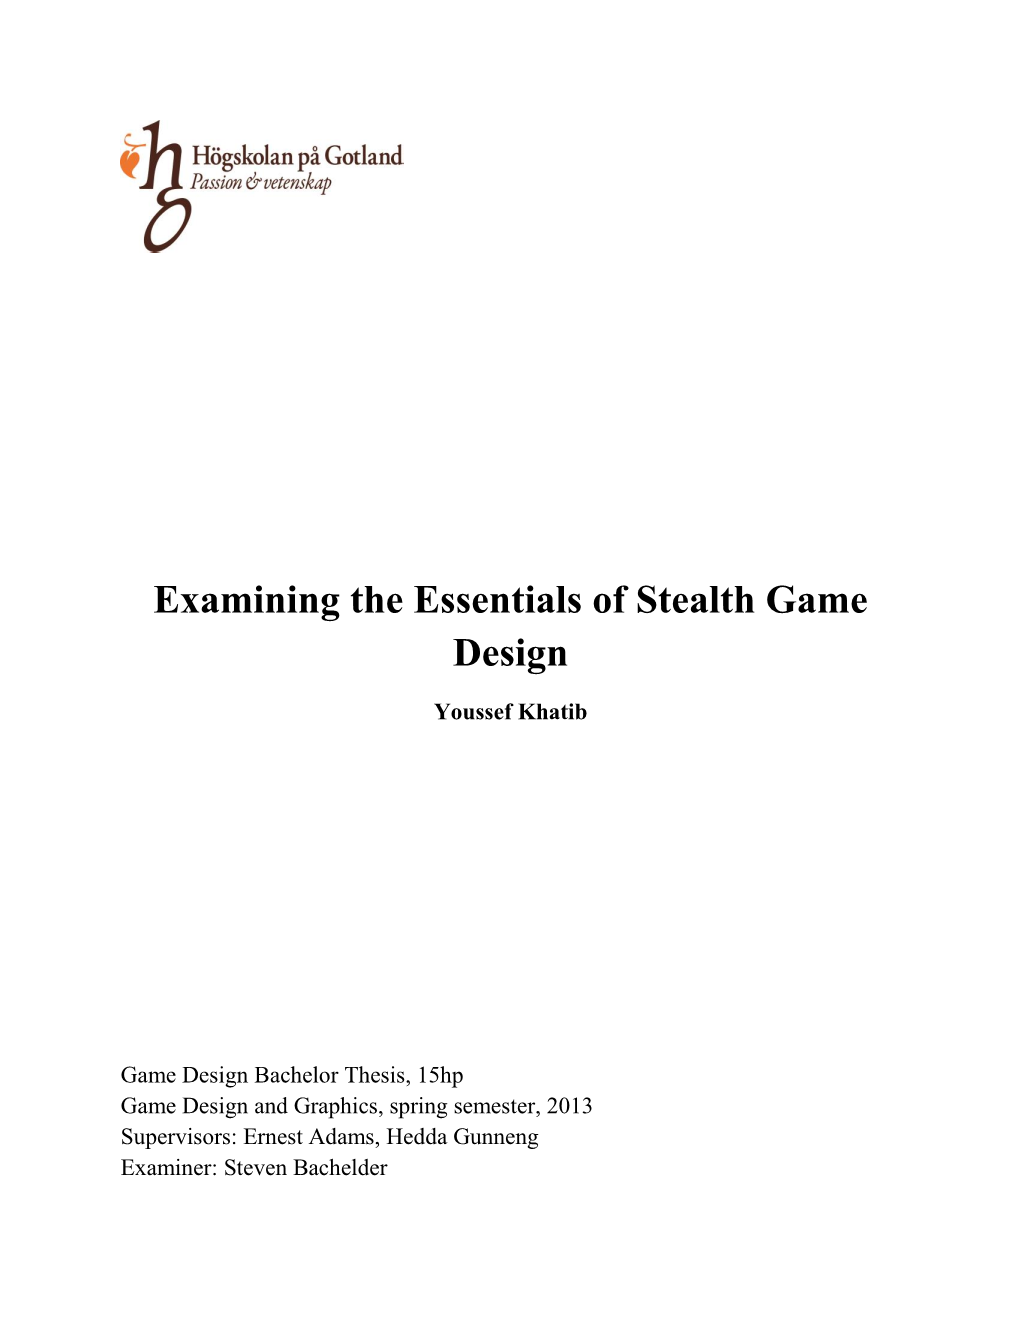 Examining the Building Blocks of Stealth Centric Design